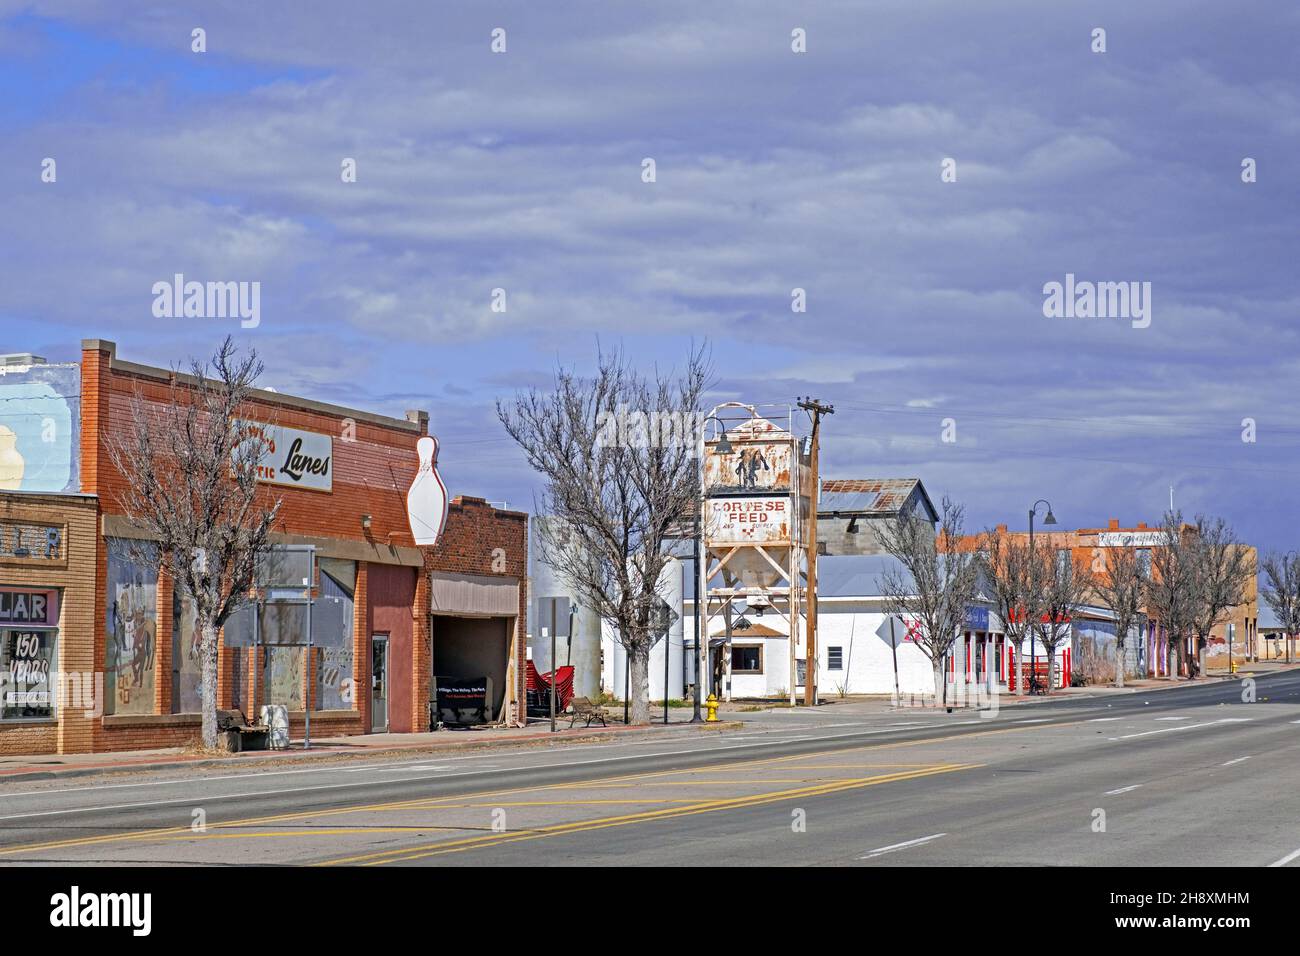 Stores along the U.S. Route 84 / US 84 in the village Fort Sumner, De Baca County, New Mexico, United States / USA Stock Photo